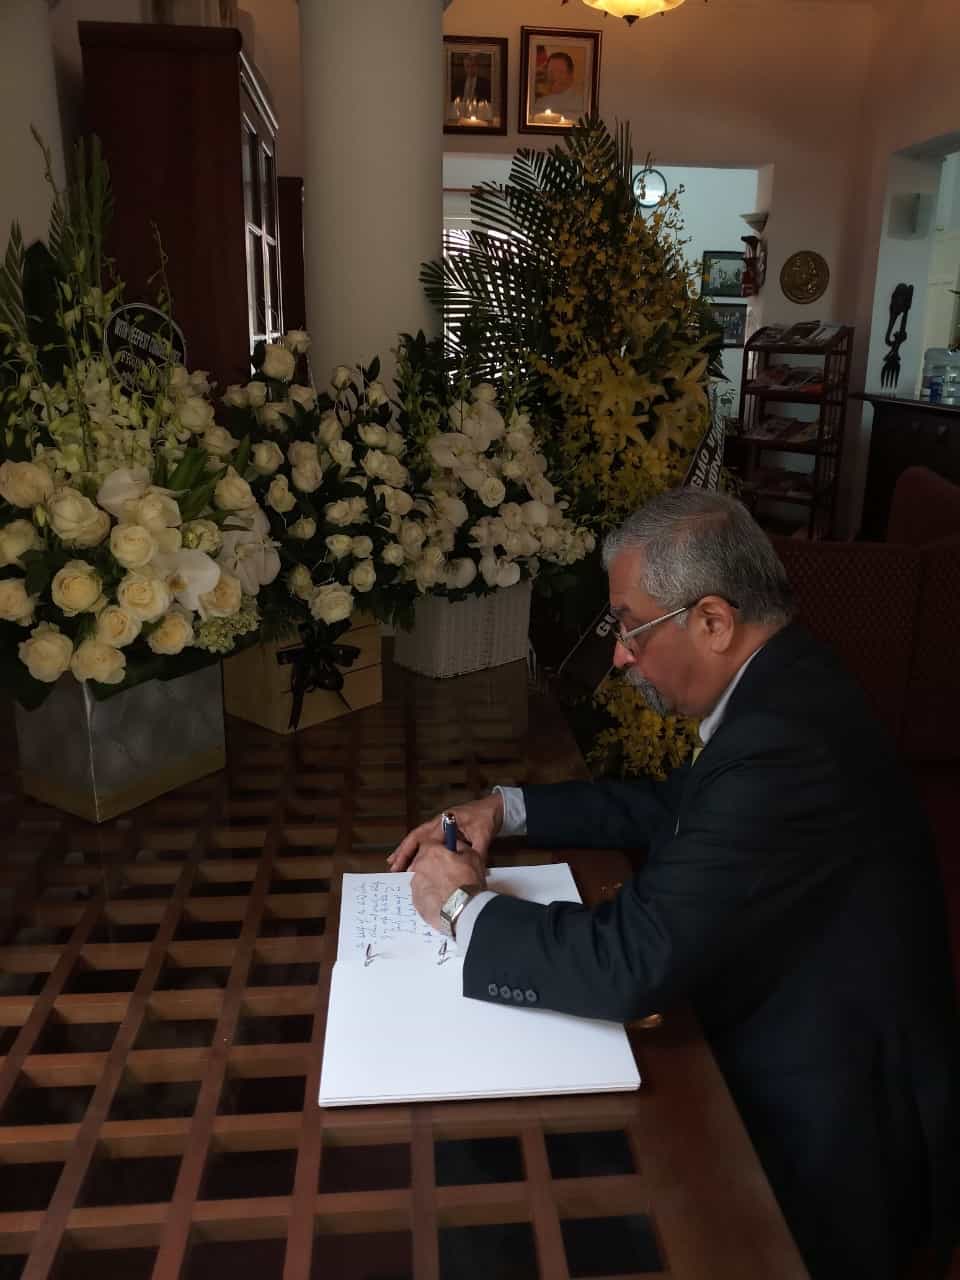 Image 02 - Signing the Book of Condolences by Mr. Kamal Malhotra, UN Resident Coordinator in Viet Nam